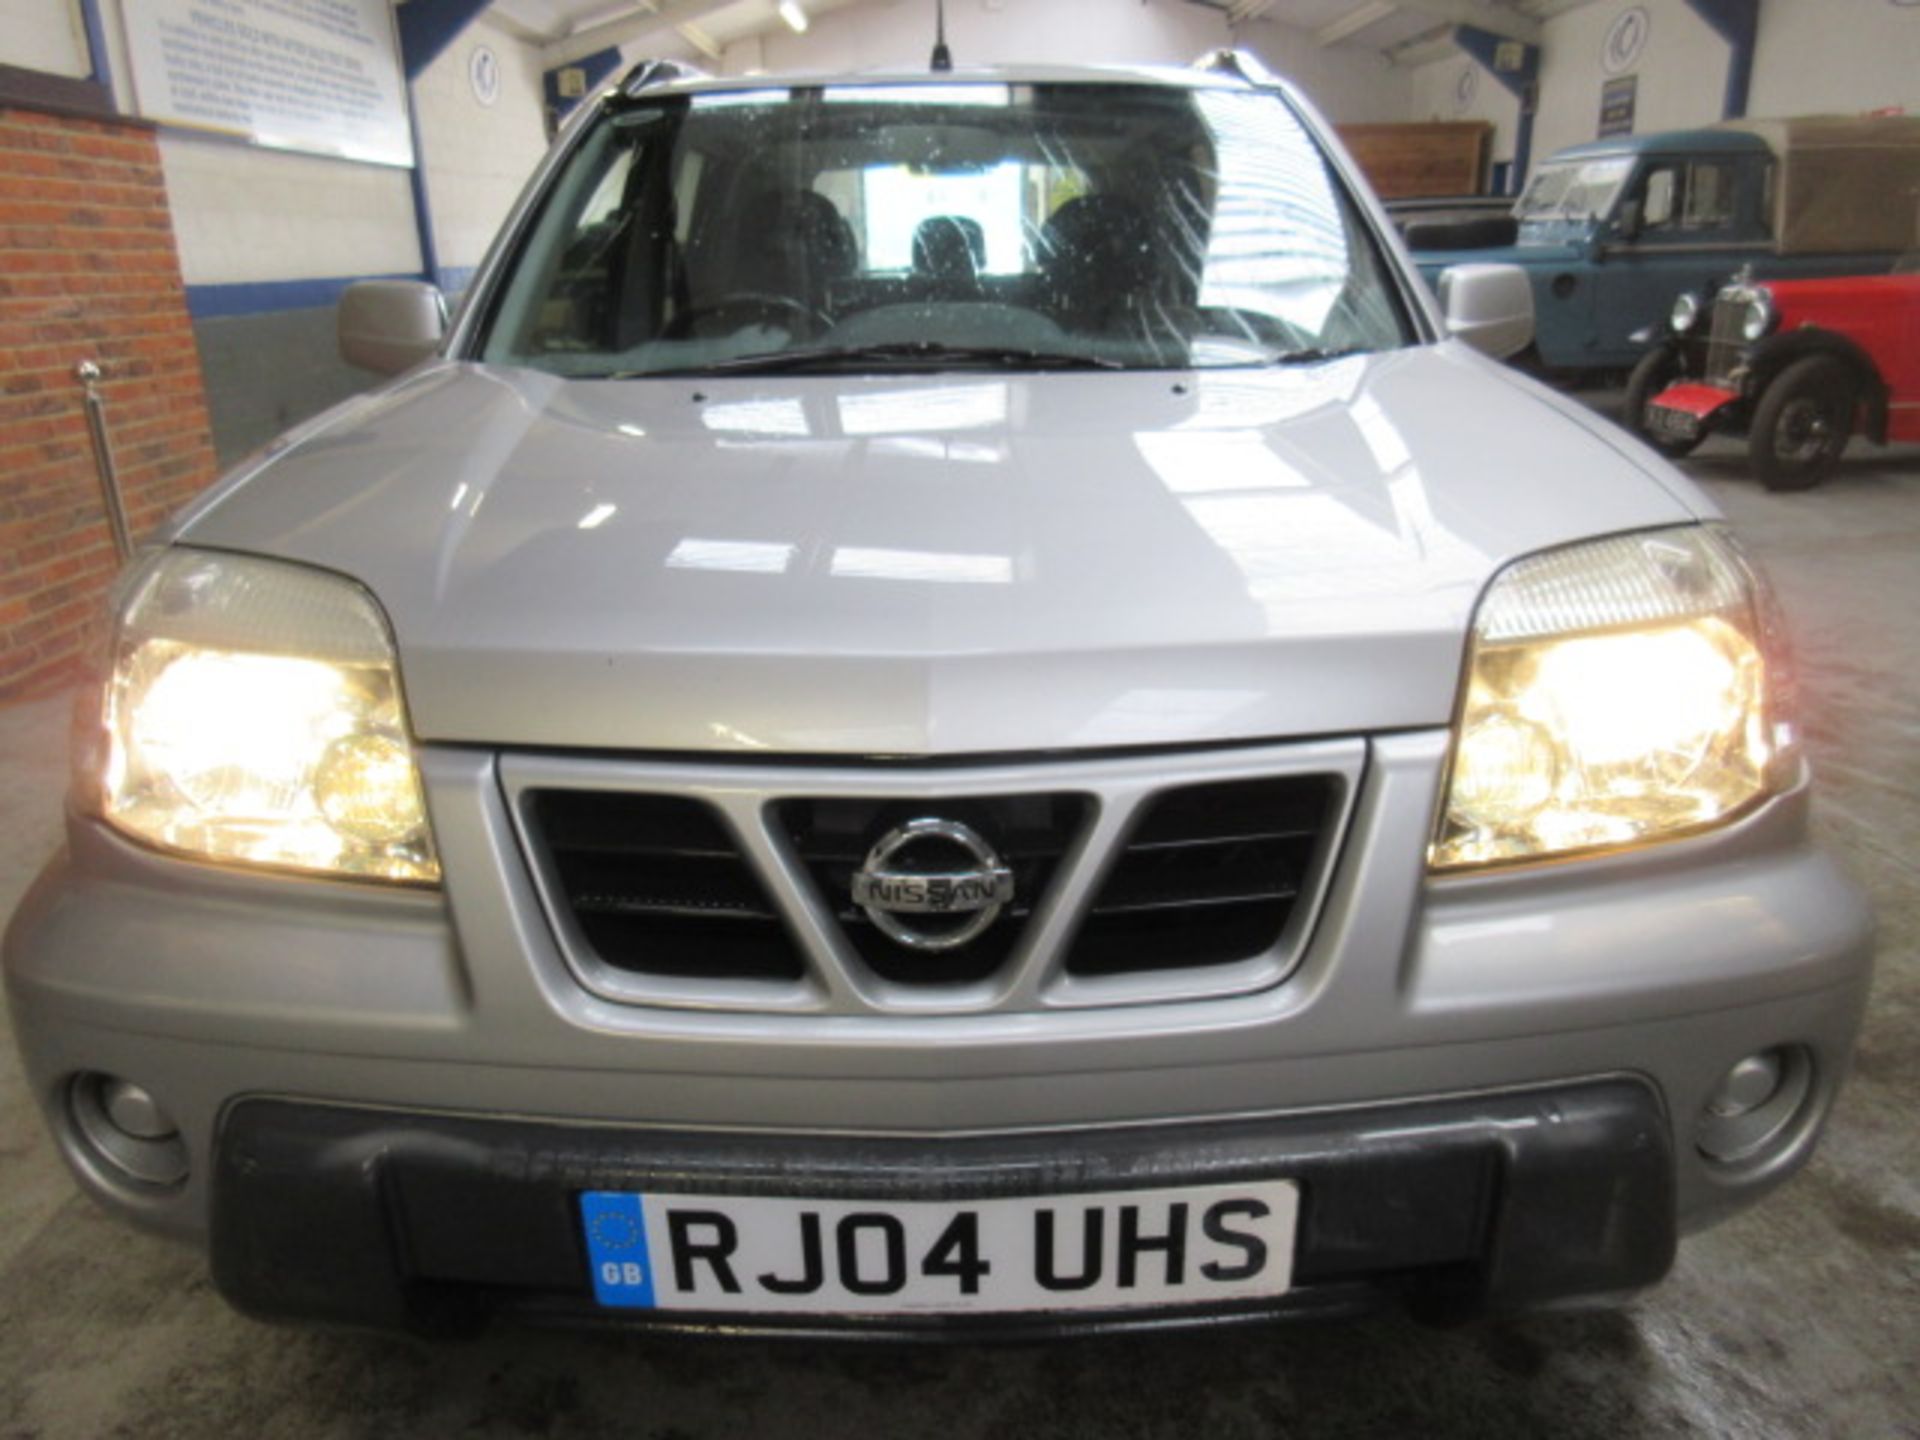 04 04 Nissan X Trail Sport DCI - Image 3 of 24